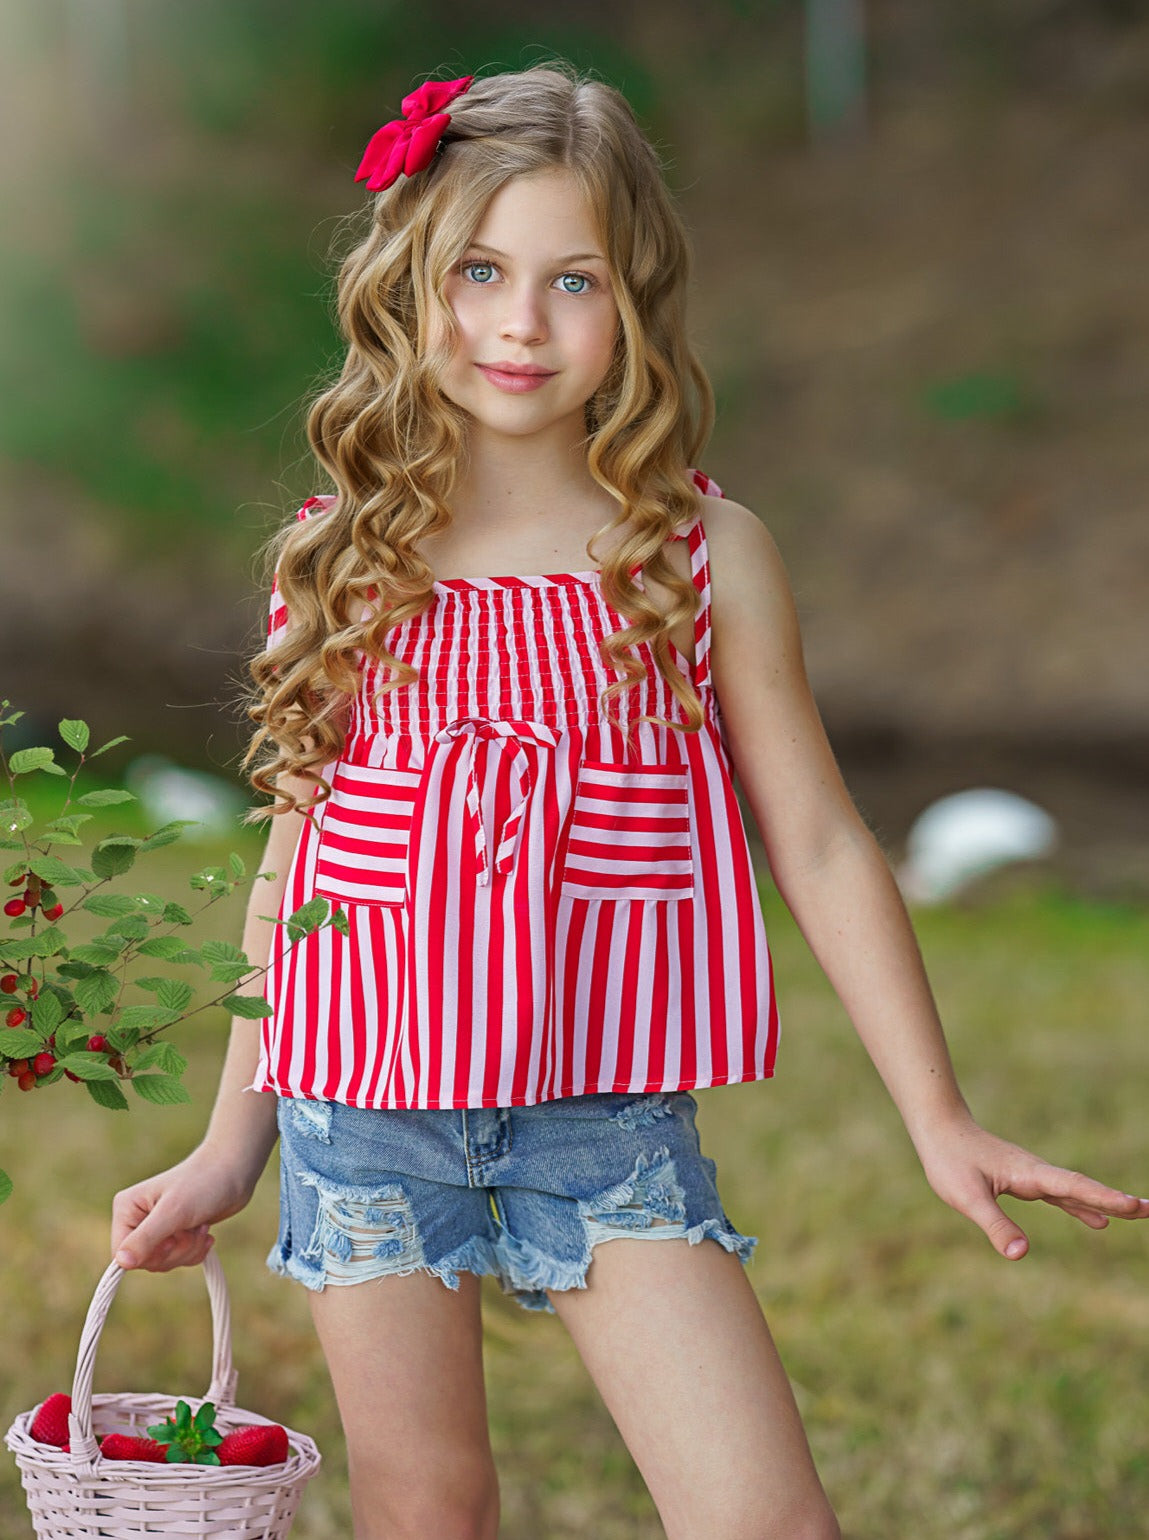 Kids Spring Clothes  Girls Eyelet Lace Top & Lined Denim Shorts Set – Mia  Belle Girls